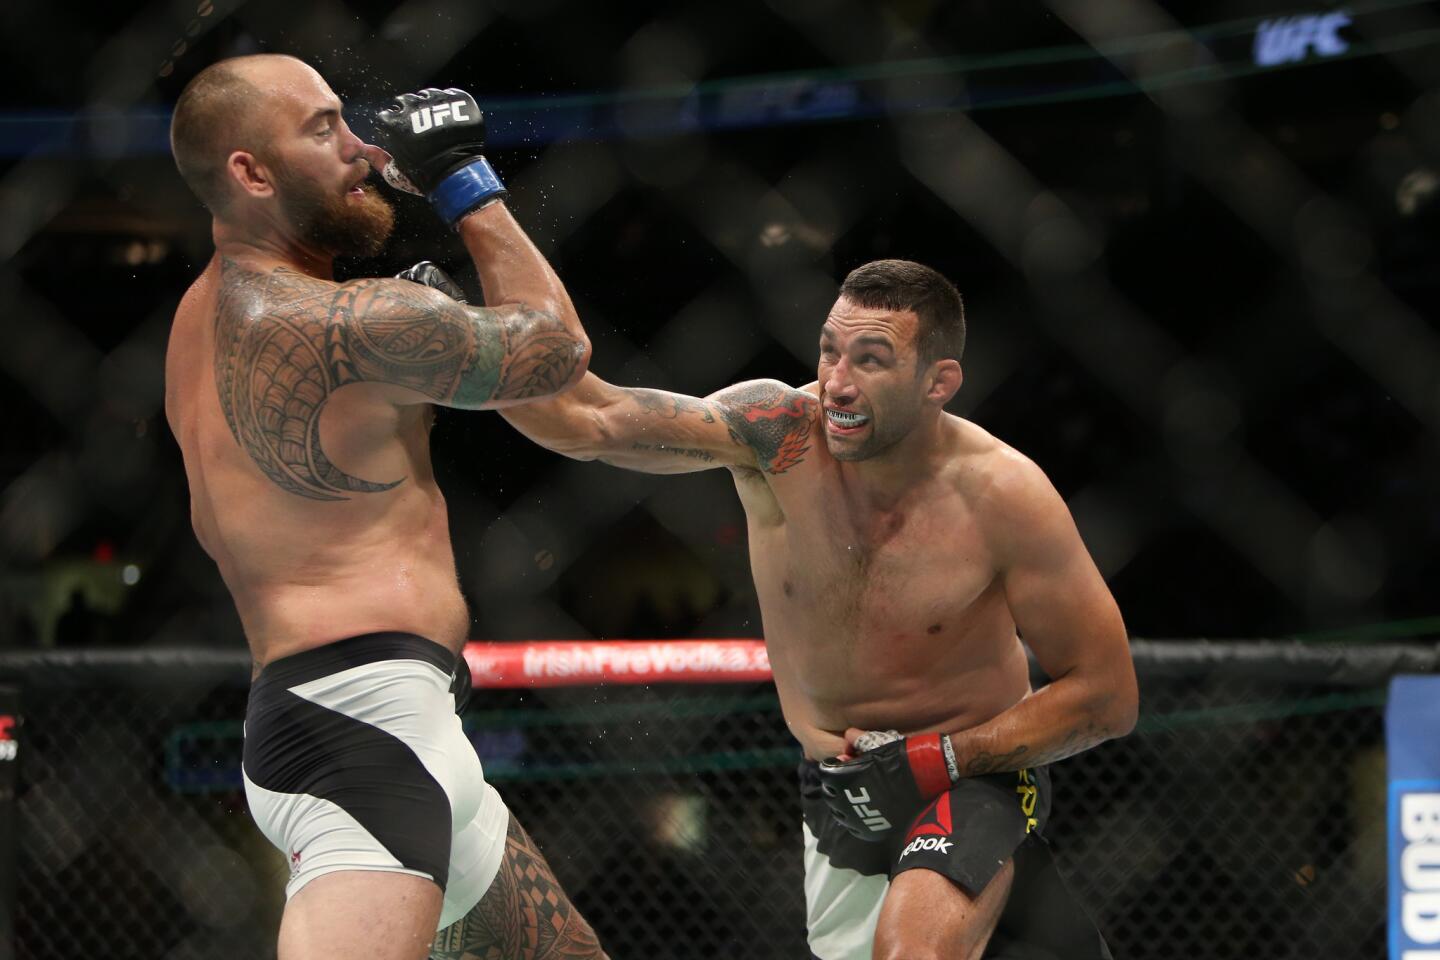 Fabricio Werdum beat Travis Browne by unanimous decision Sept. 10 at UFC 203 in Cleveland.